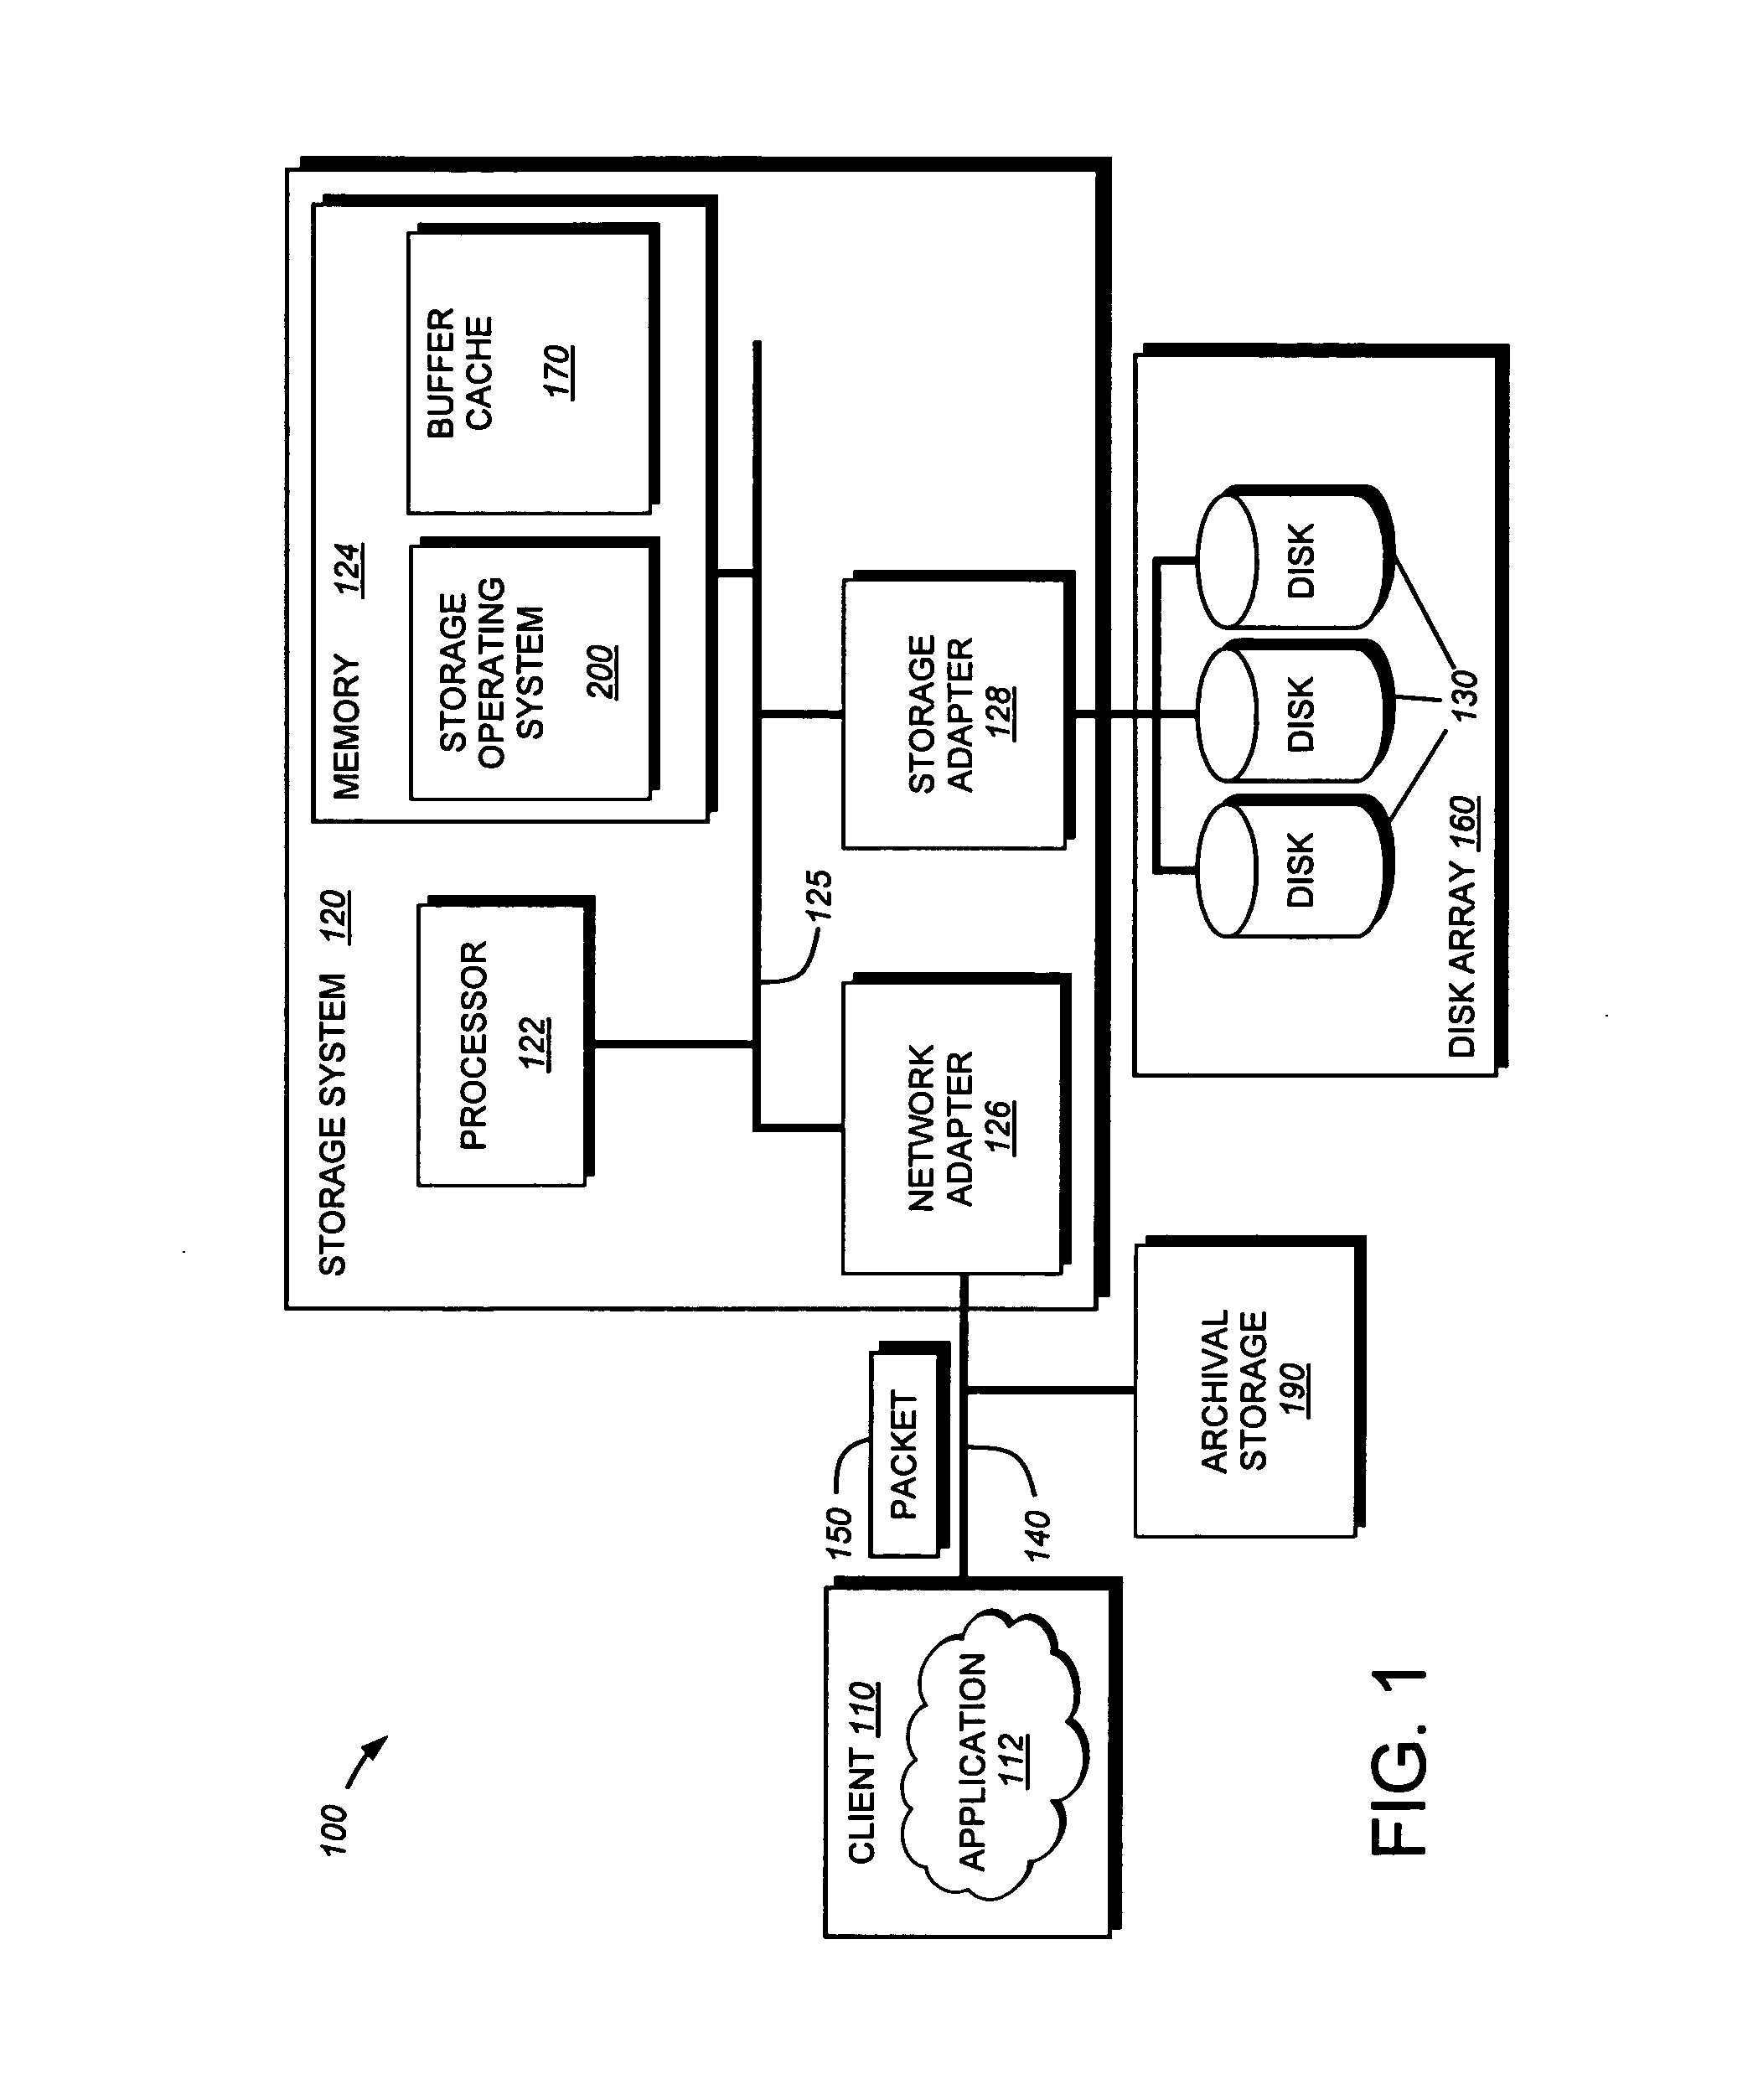 System and method for automatic scheduling and policy provisioning for information lifecycle management